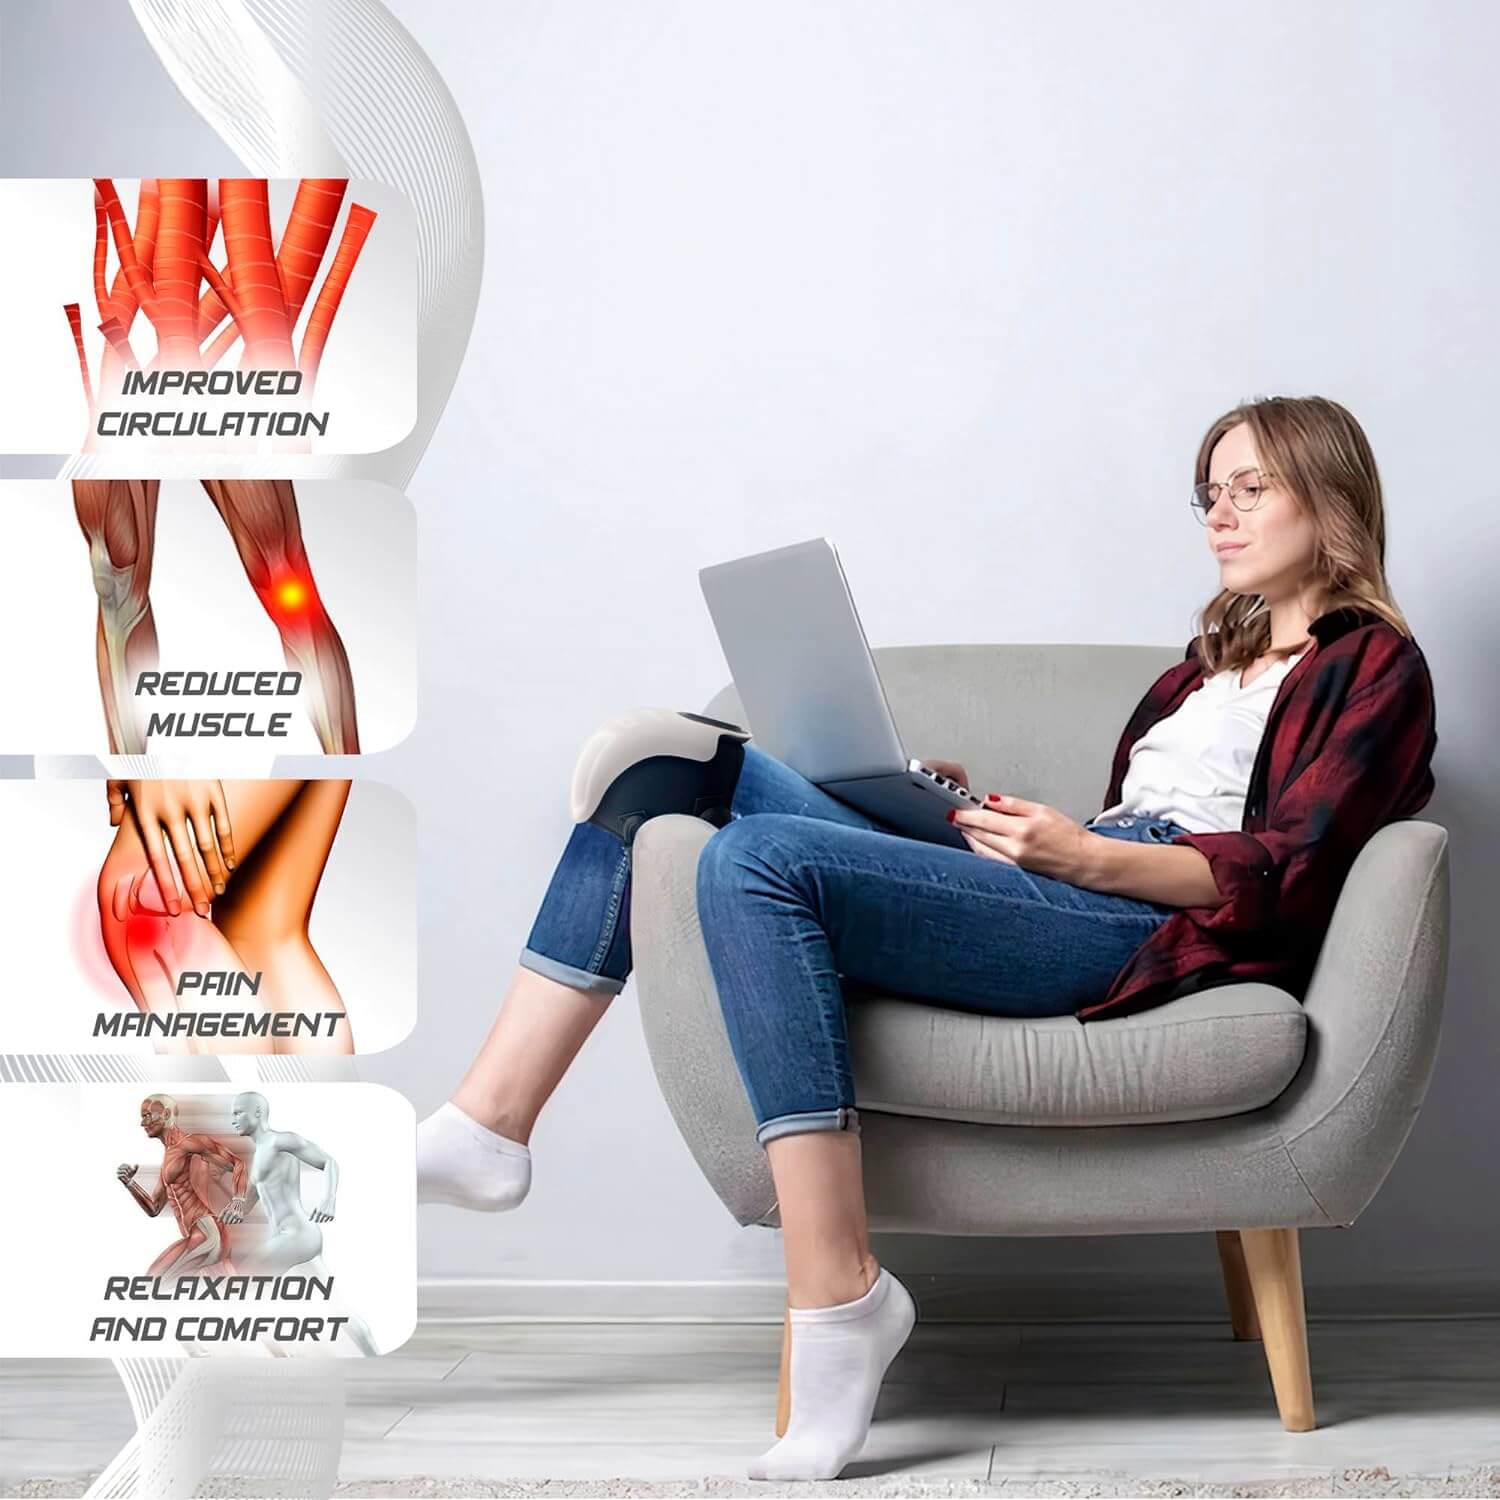 EaseKnee™ Therapeutic Infrared Massager